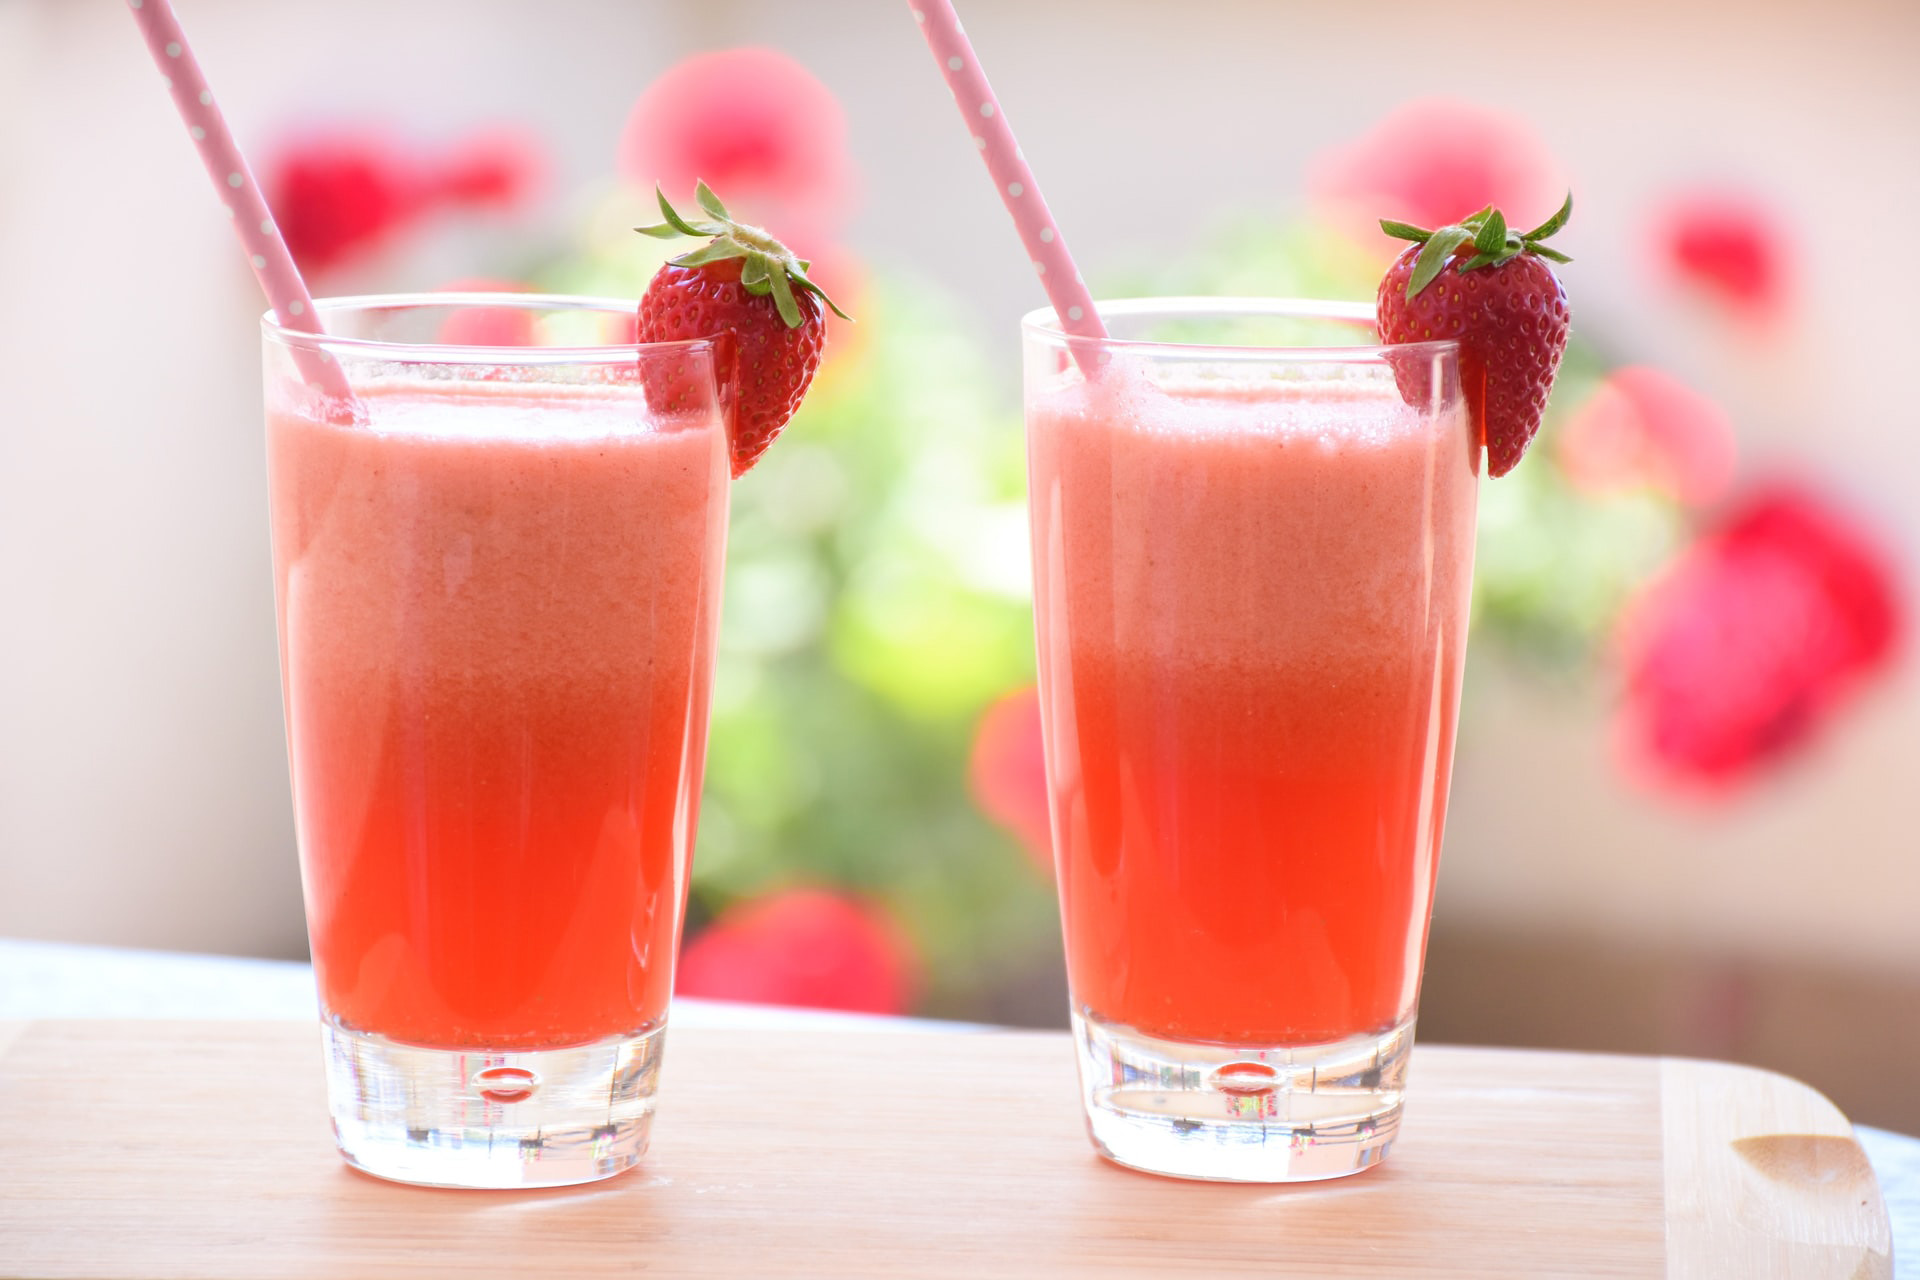 Two glasses filled with a pink liquid with a strawberry on the rim and pink polka dot straws.